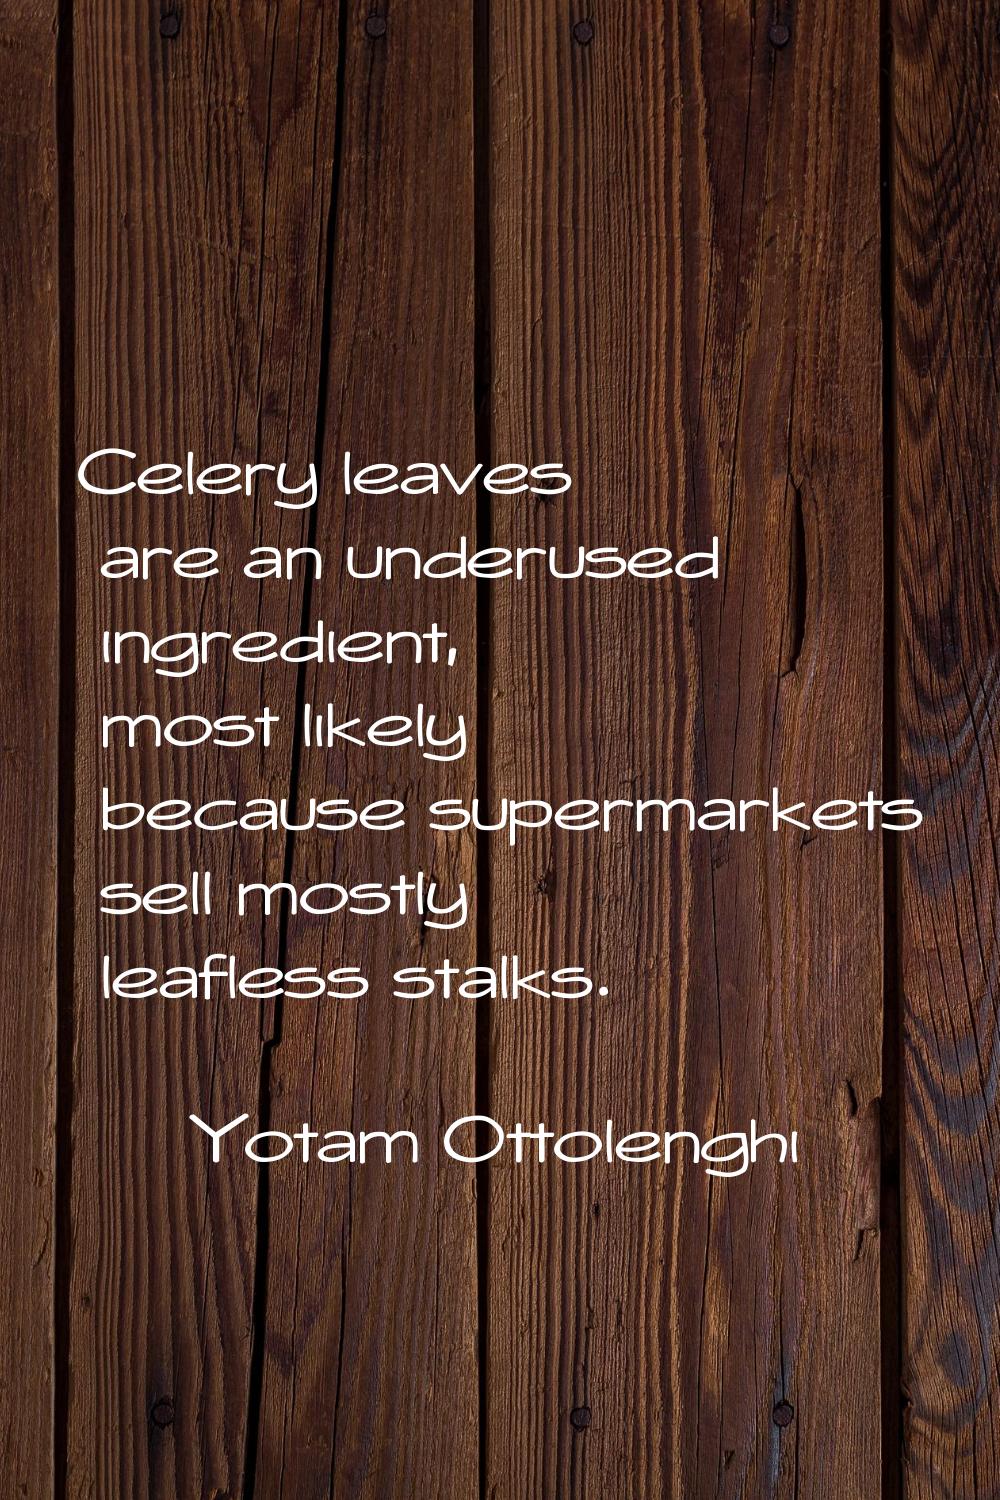 Celery leaves are an underused ingredient, most likely because supermarkets sell mostly leafless st